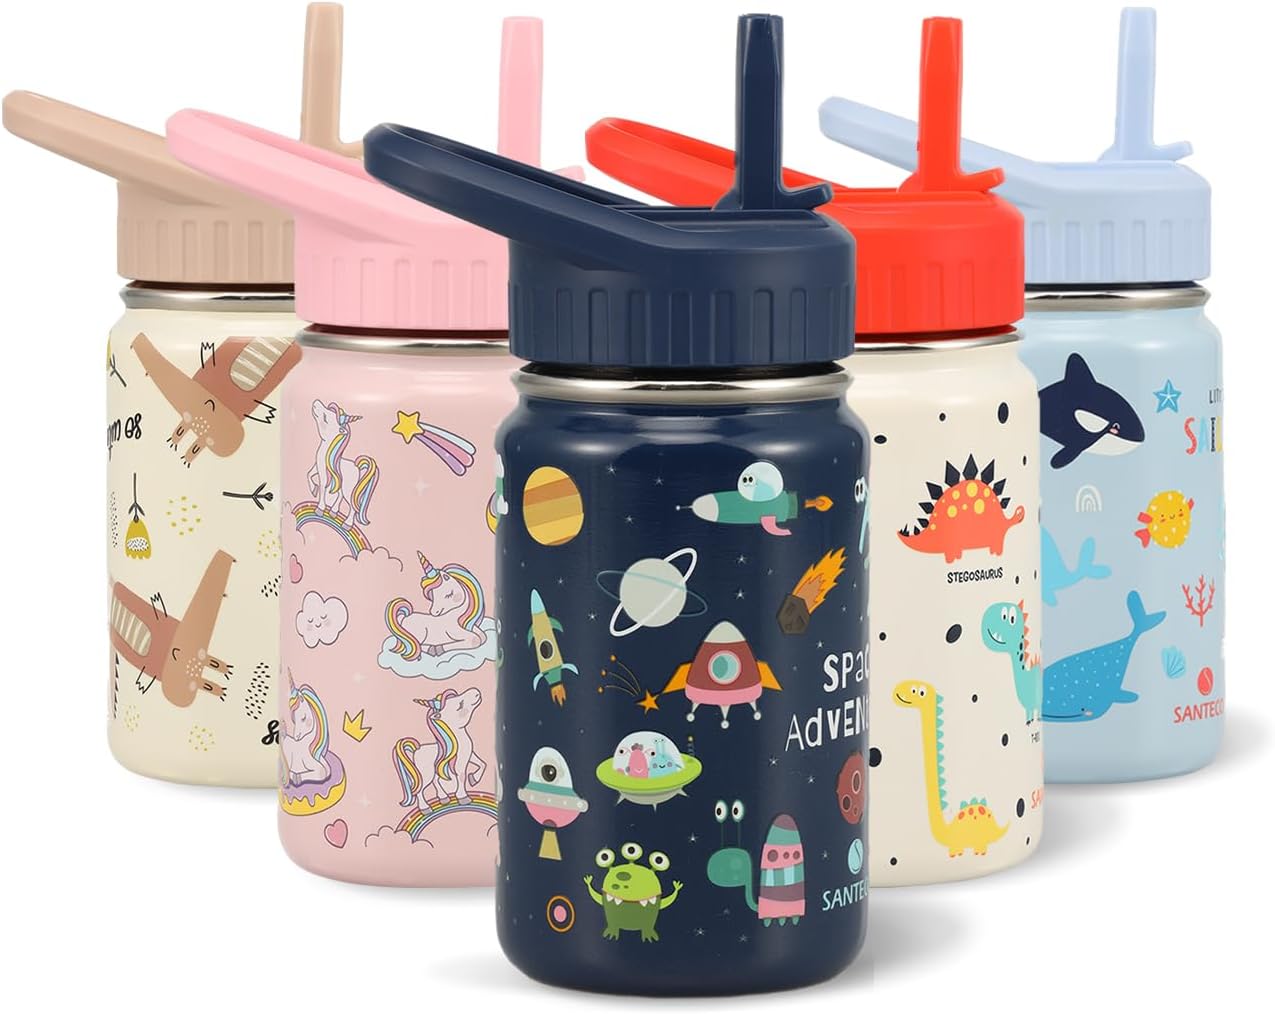 SANTECO Kids Water Bottle for School with Straw Lid,12oz Stainless Steel Insulated Water Bottle for Kids, Leak Proof Cute Animal Toddler Straw Cup for School Girls Boys